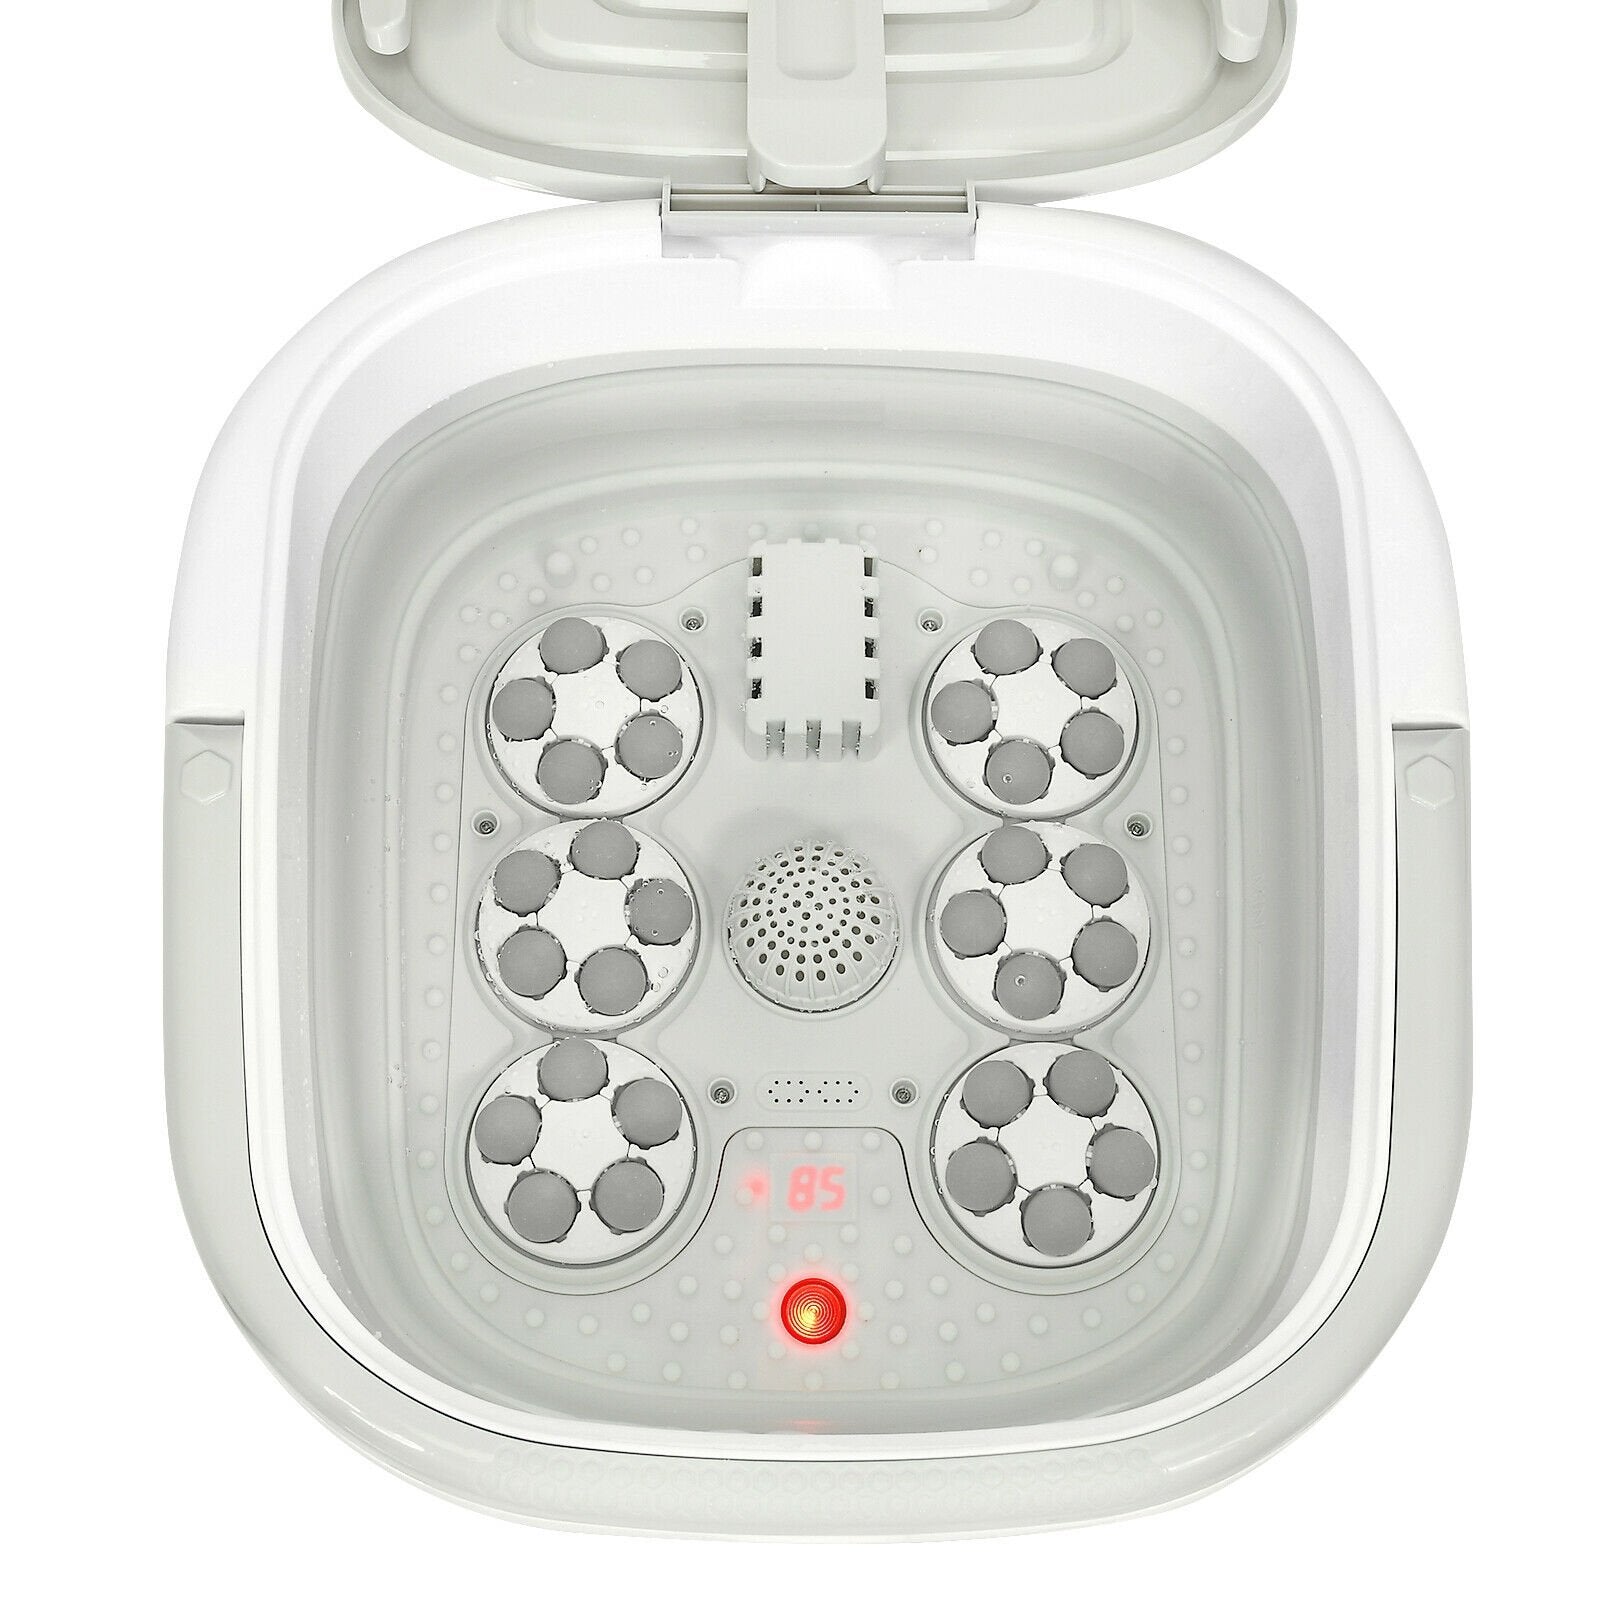 Foldable Foot Spa Bath Motorized Massager with Bubble Red Light Timer Heat, Gray at Gallery Canada